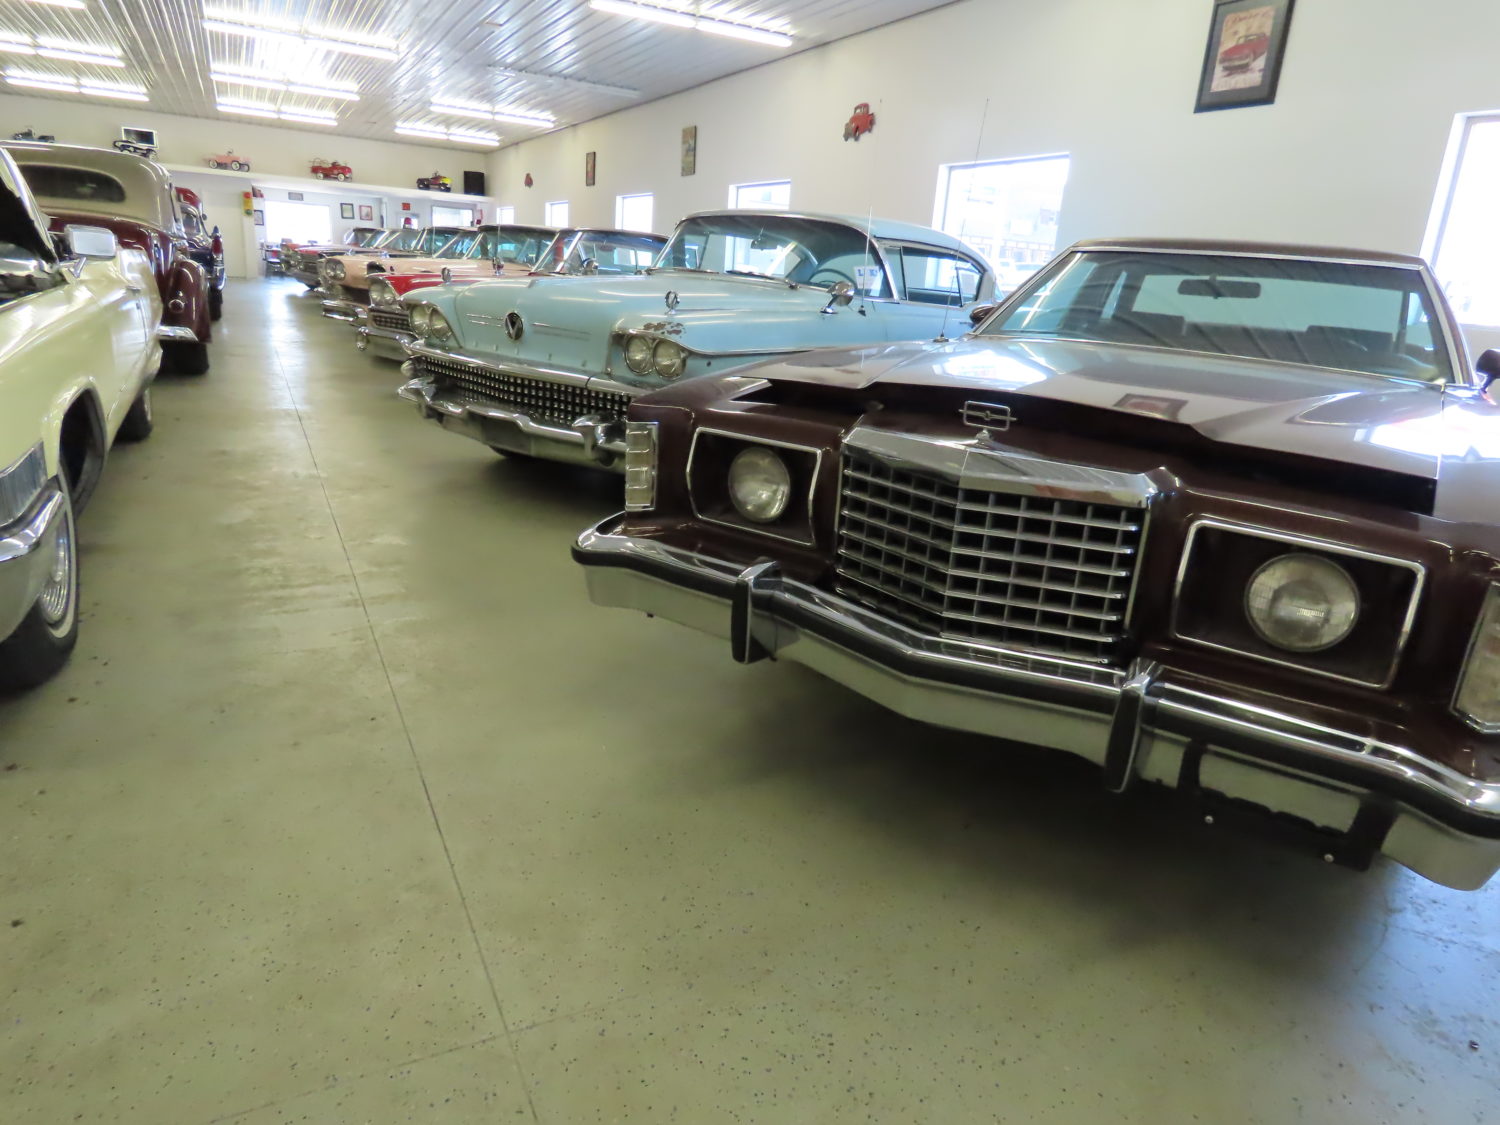 Approx. 100 American Classics Cars At Auction! The Sorensen Collection-LIVE ONSITE W/ONLINE BIDDING!  - image 2